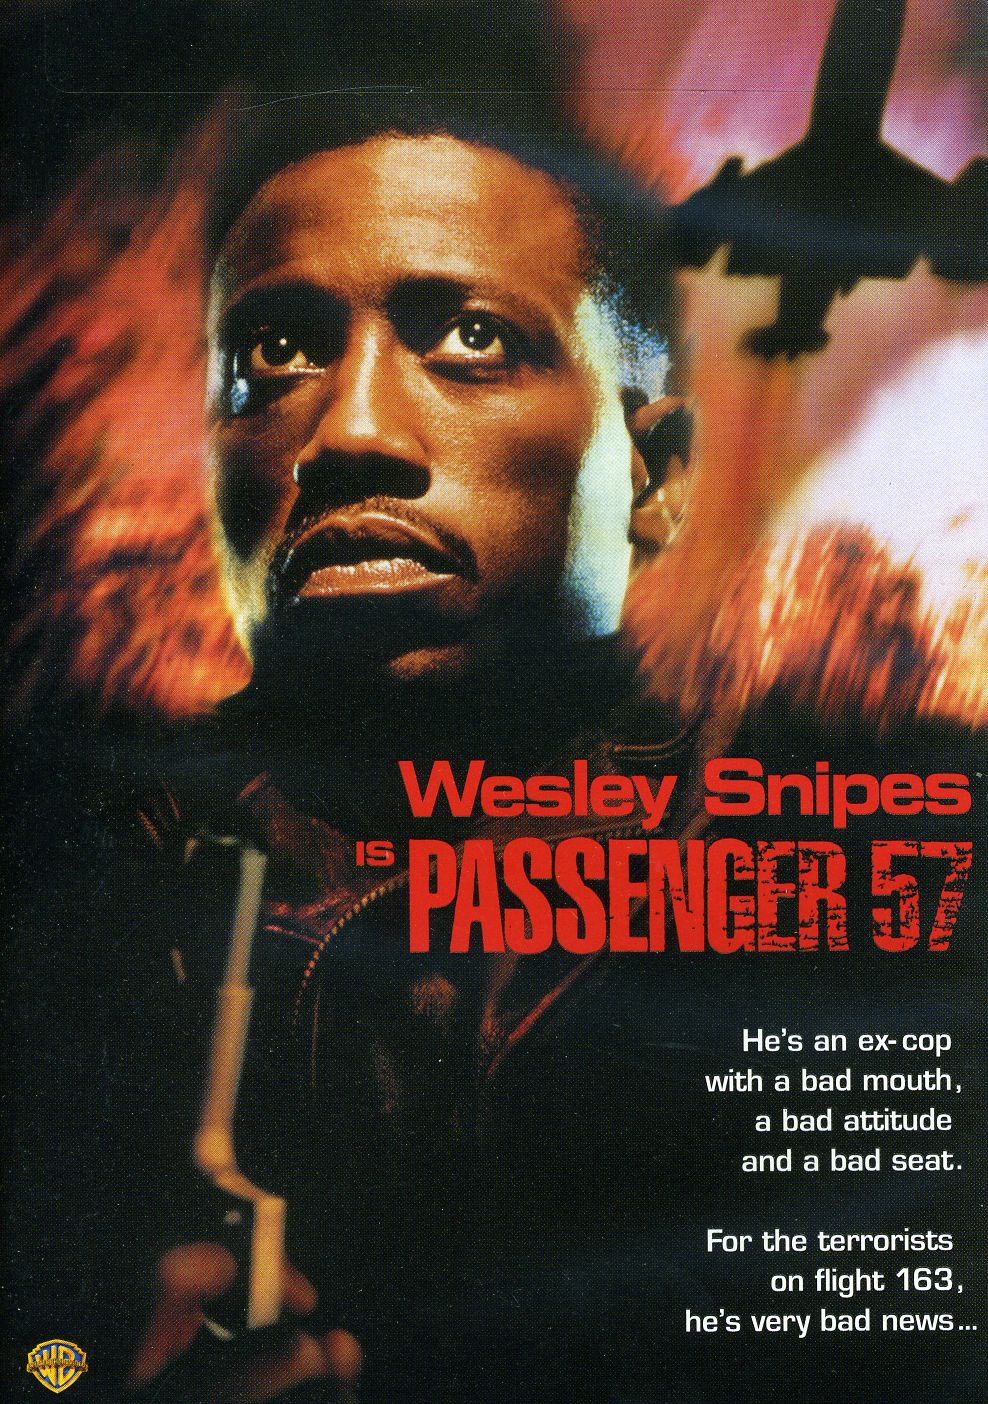 Jet Used In The Movie Passenger 57